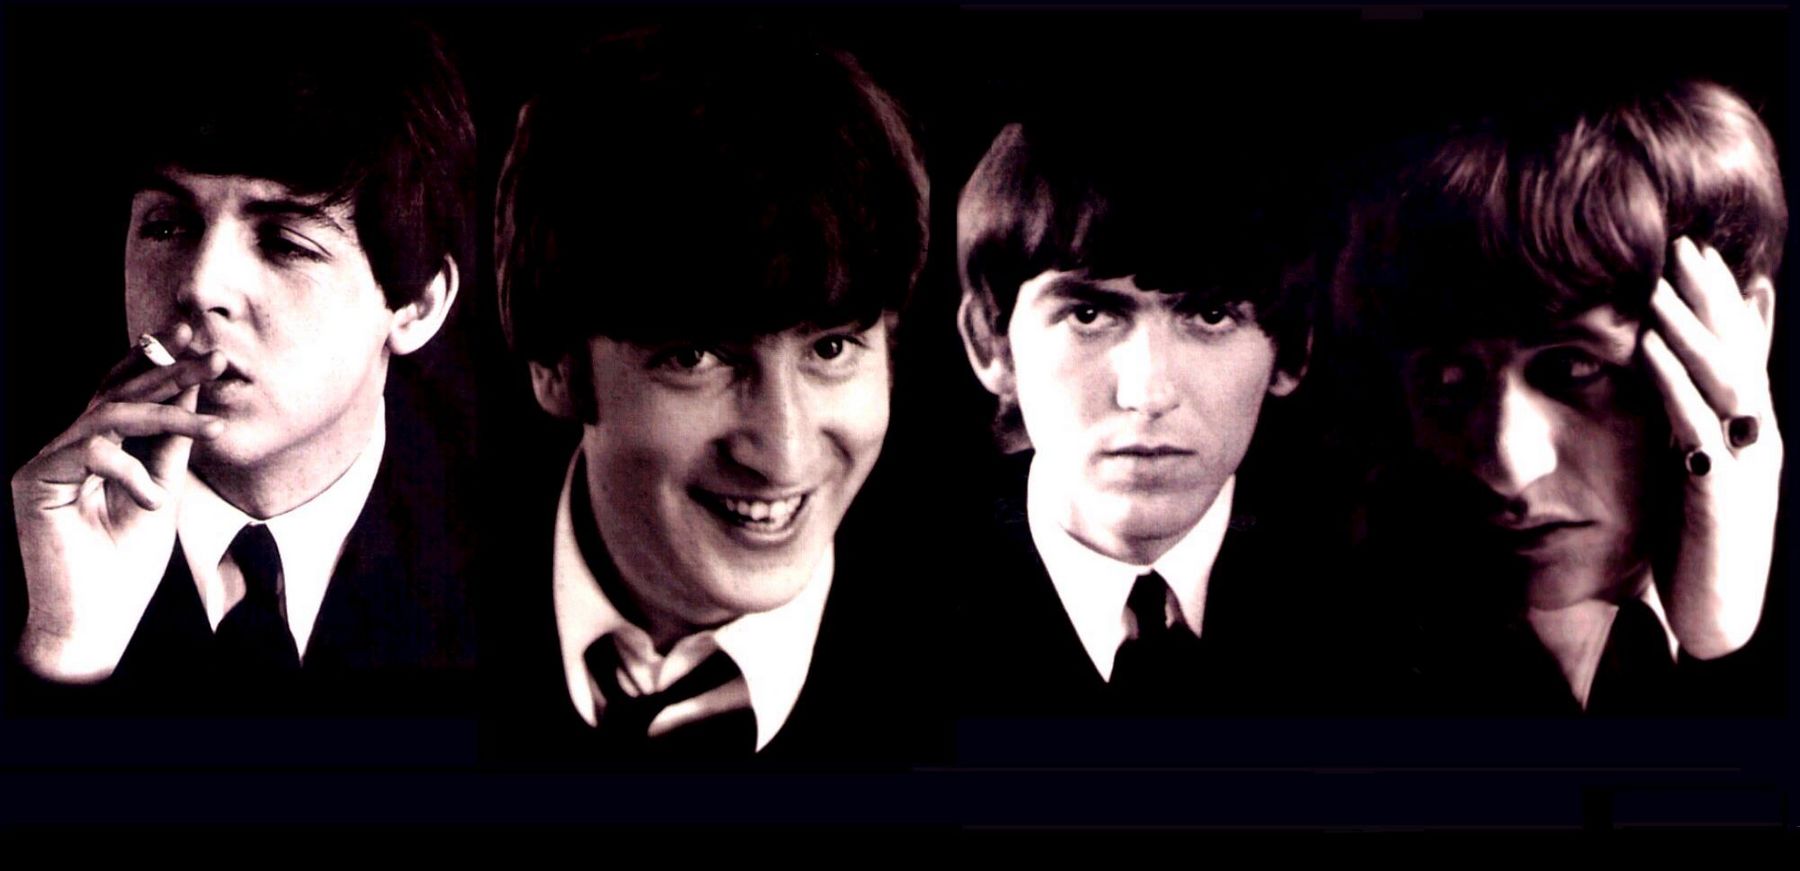 Name Beatles Wallpaper Category Image Url Size